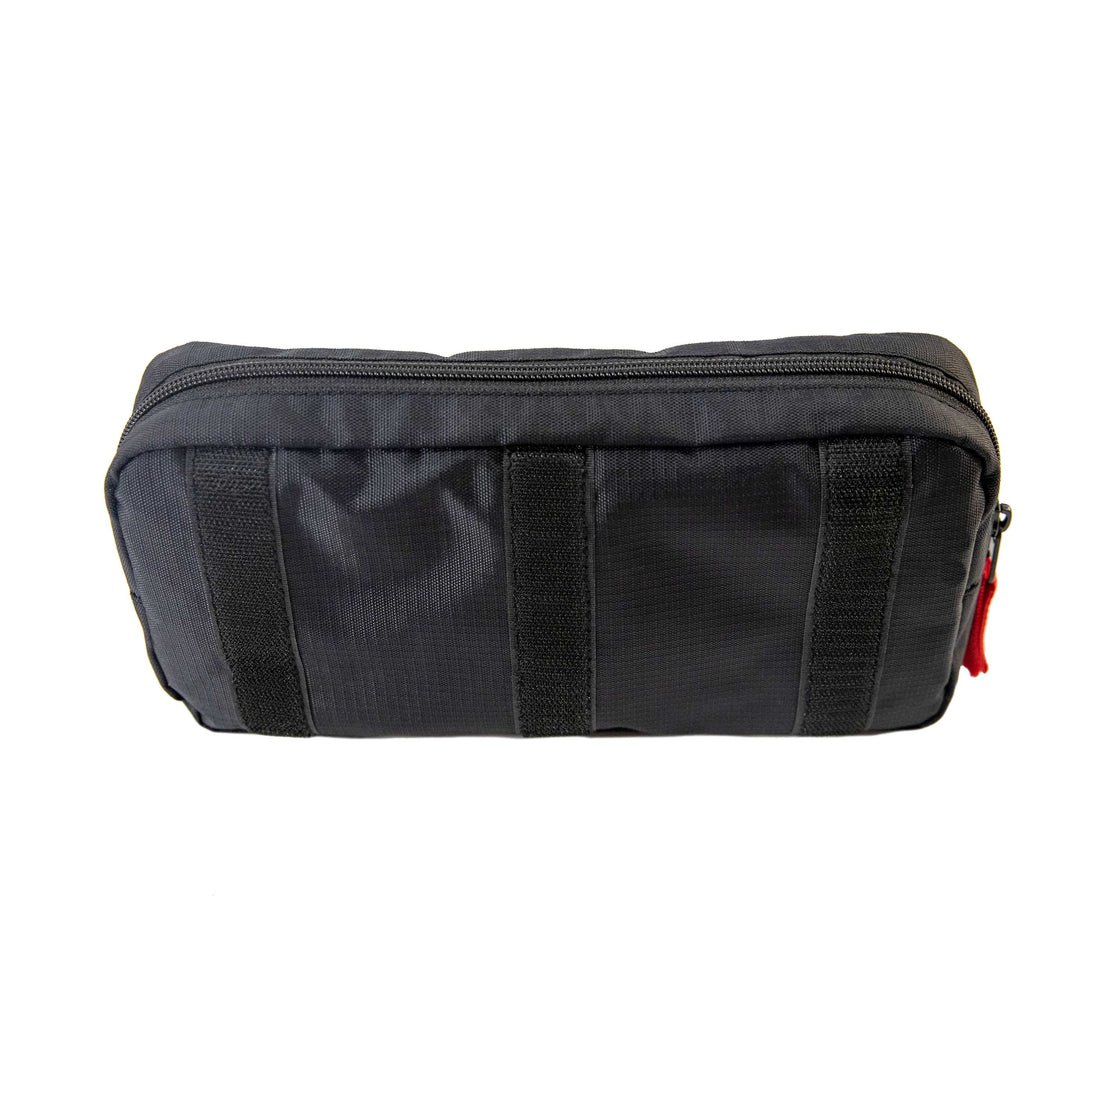 Large first aid kit pouch with clear window back